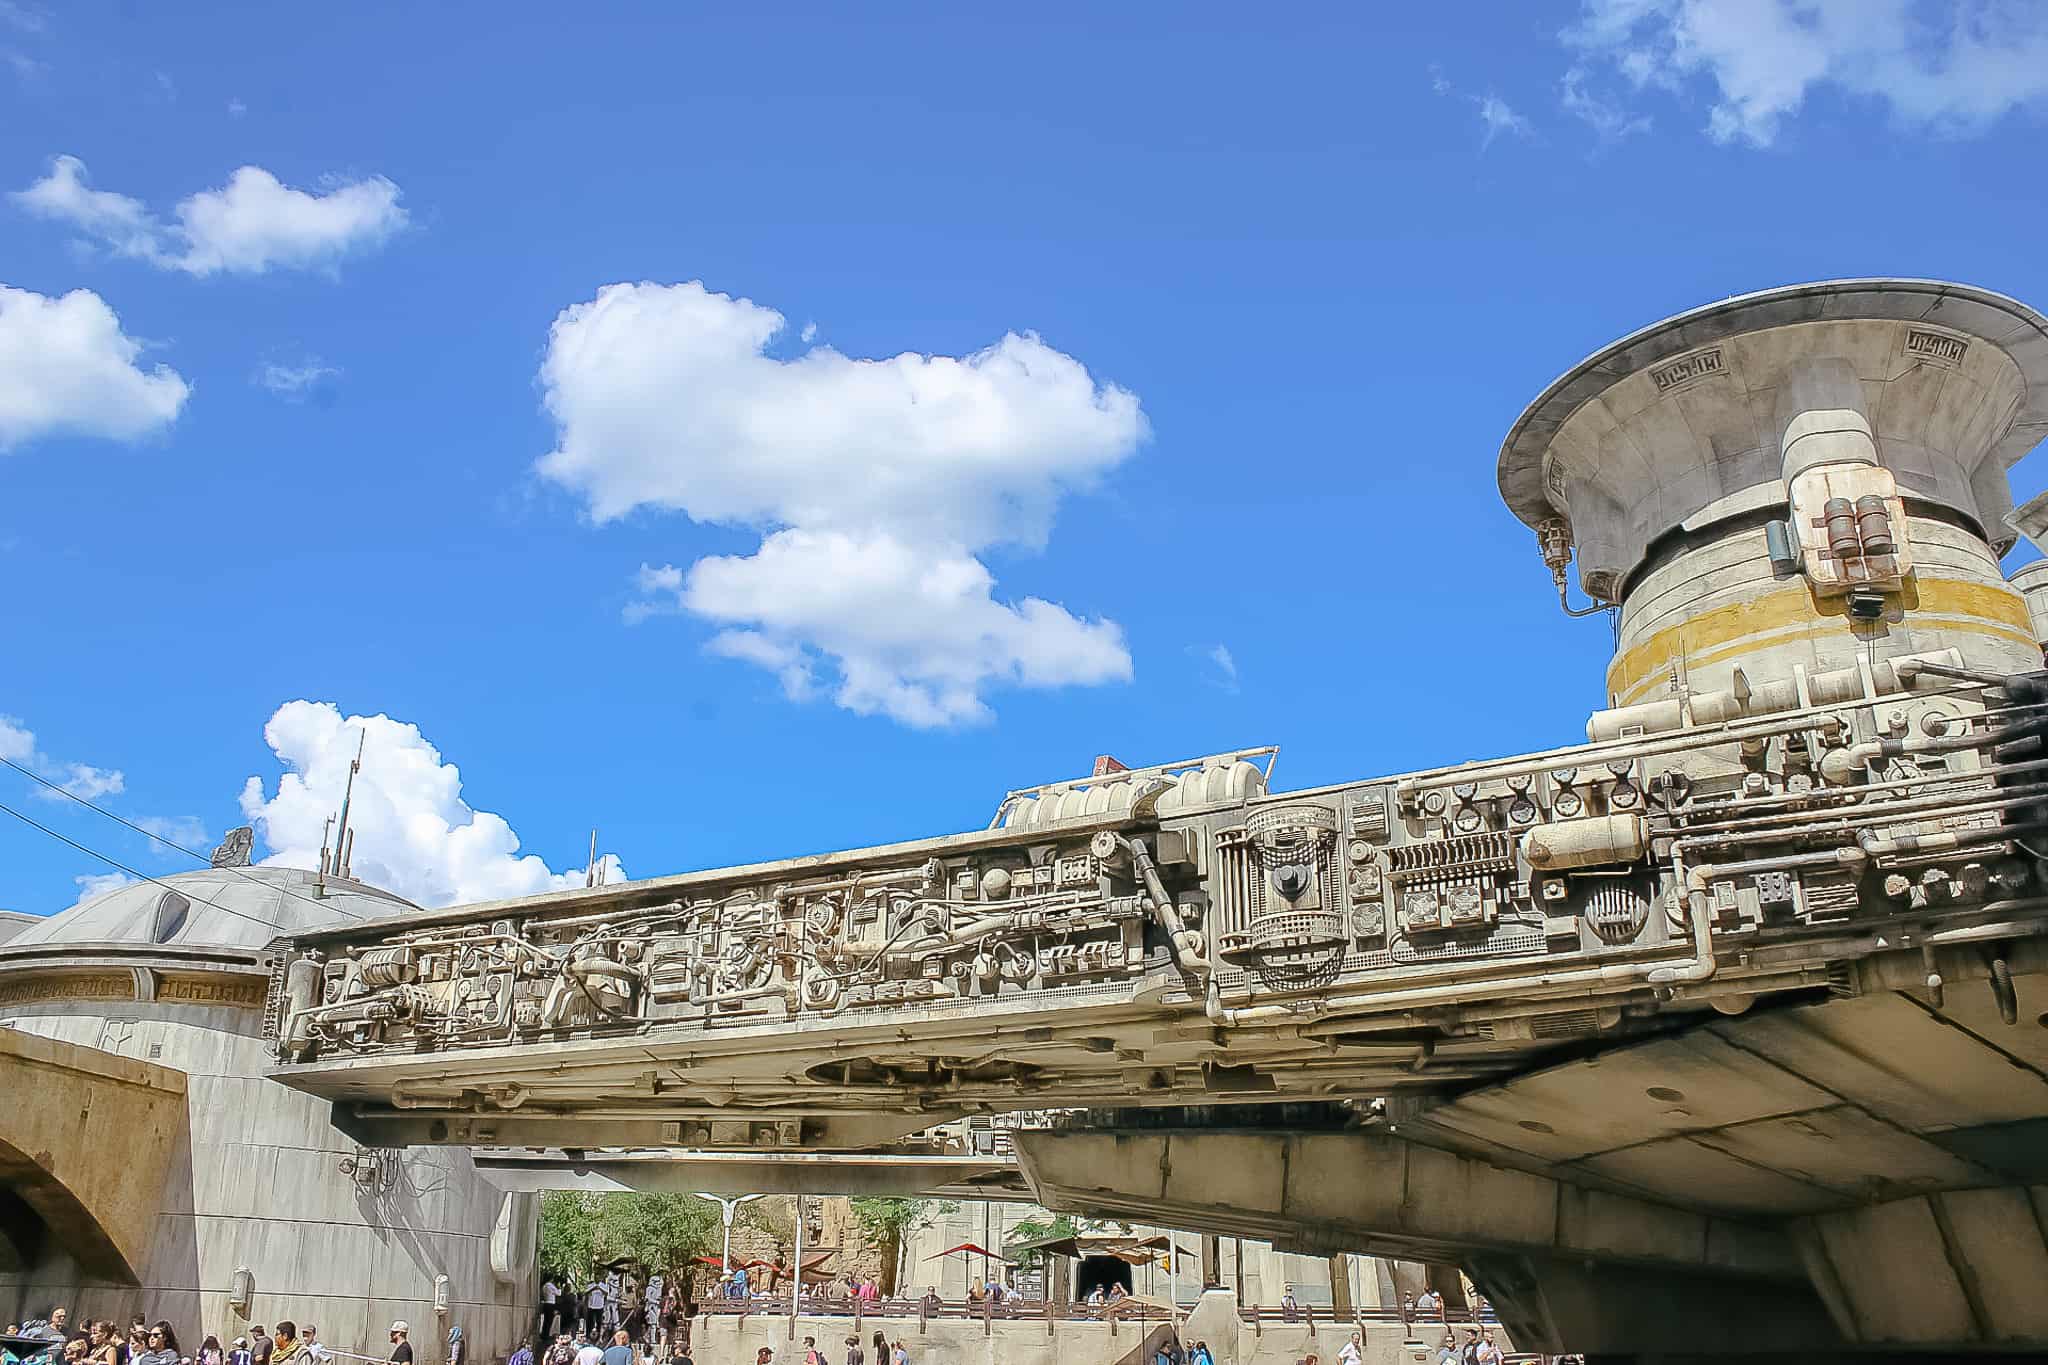 side angle view of the Millennium Falcon 